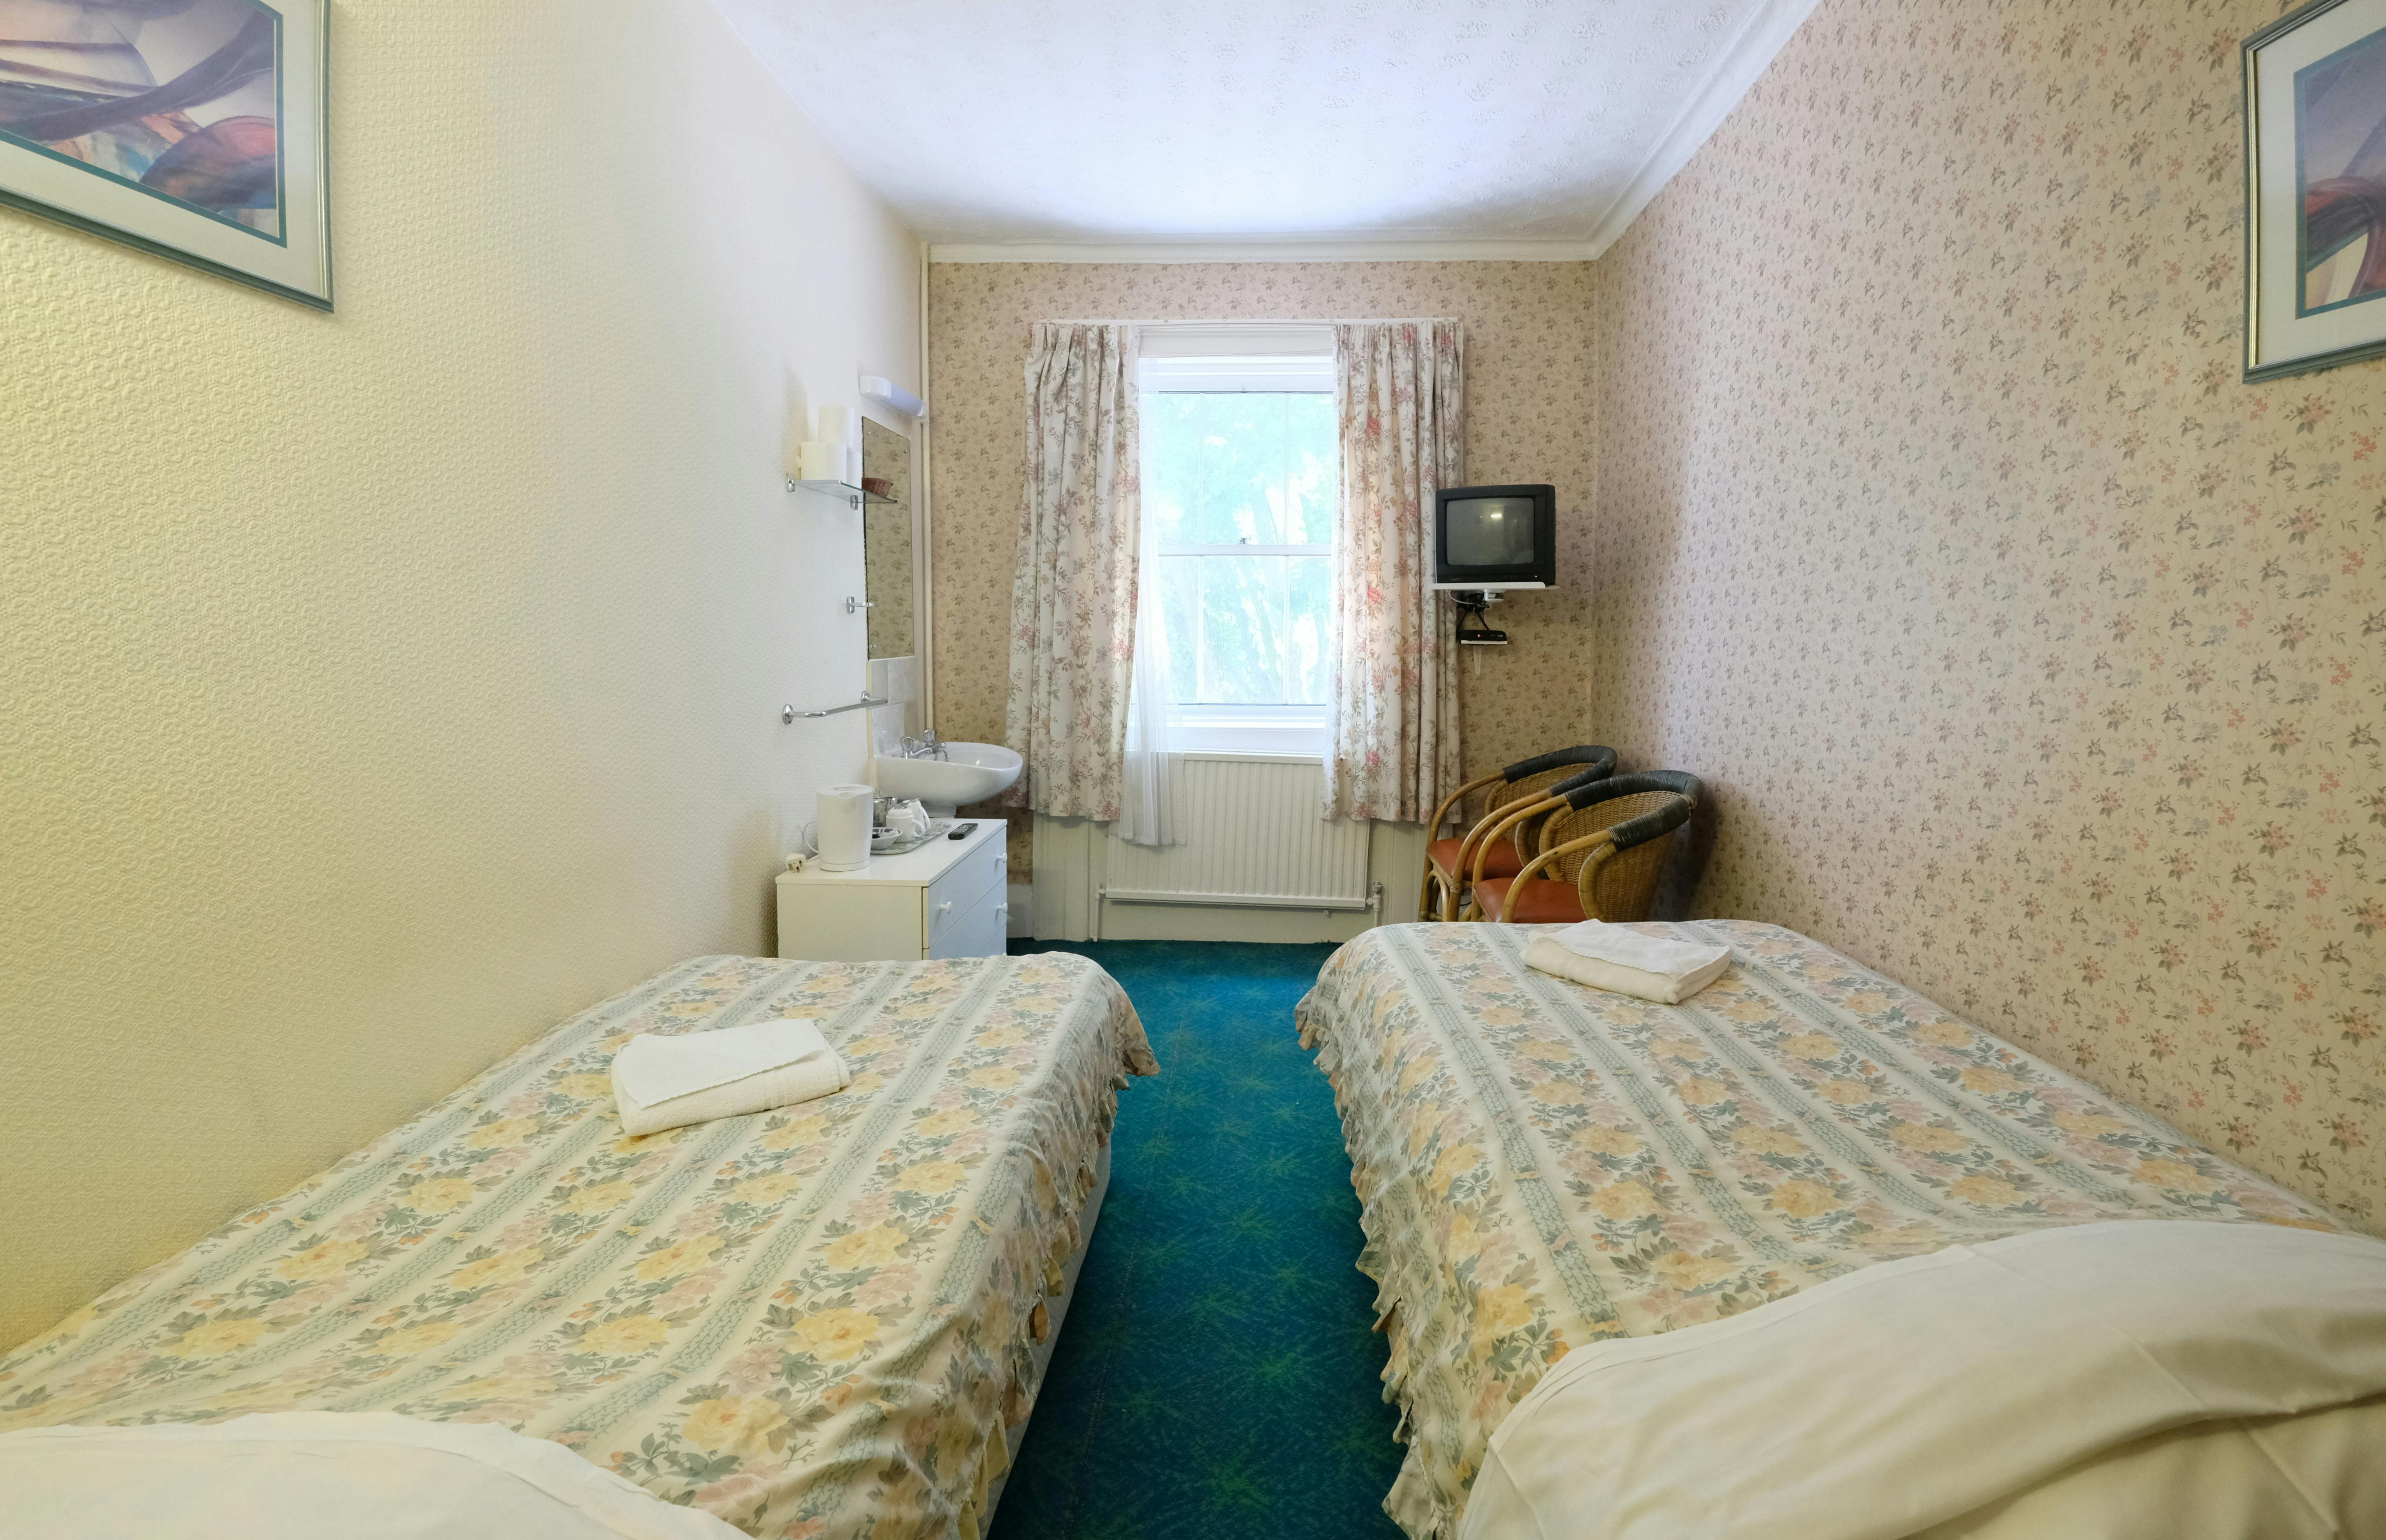 A twin room with shared bathroom in Paddington. London budget rooms.